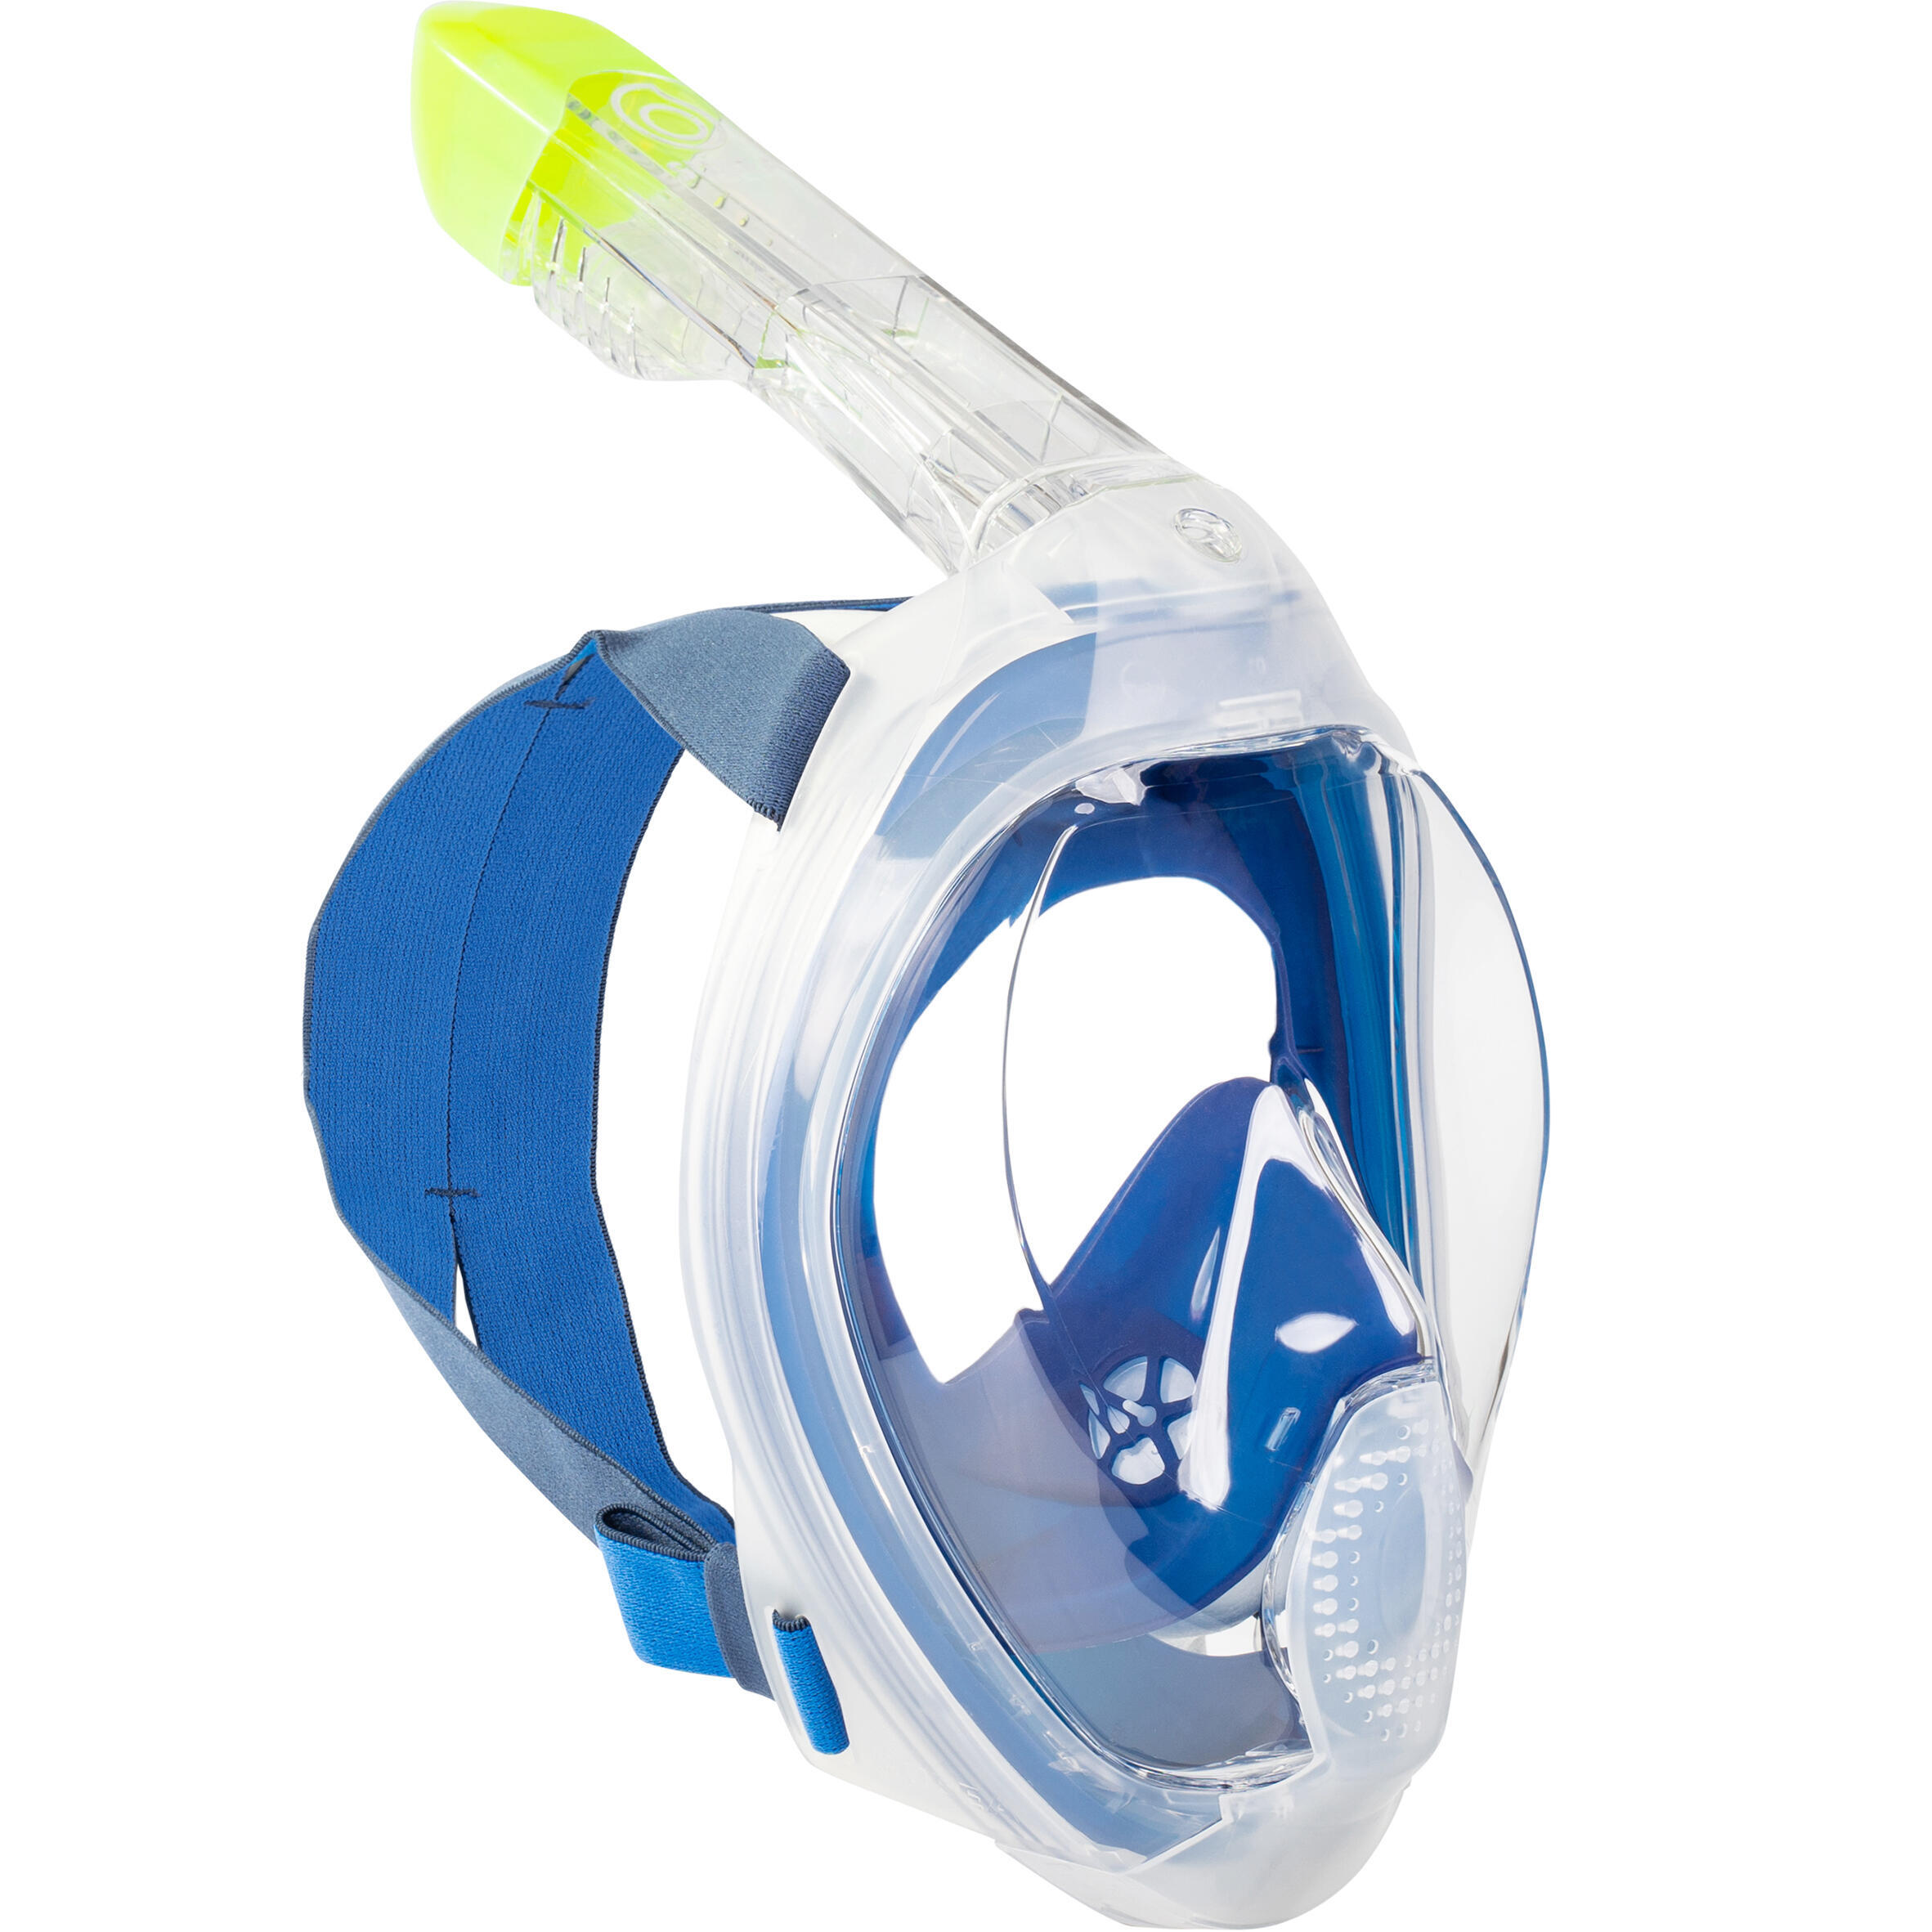 Adult’s Easybreath surface mask with an acoustic valve - 540 freetalk blue 1/8